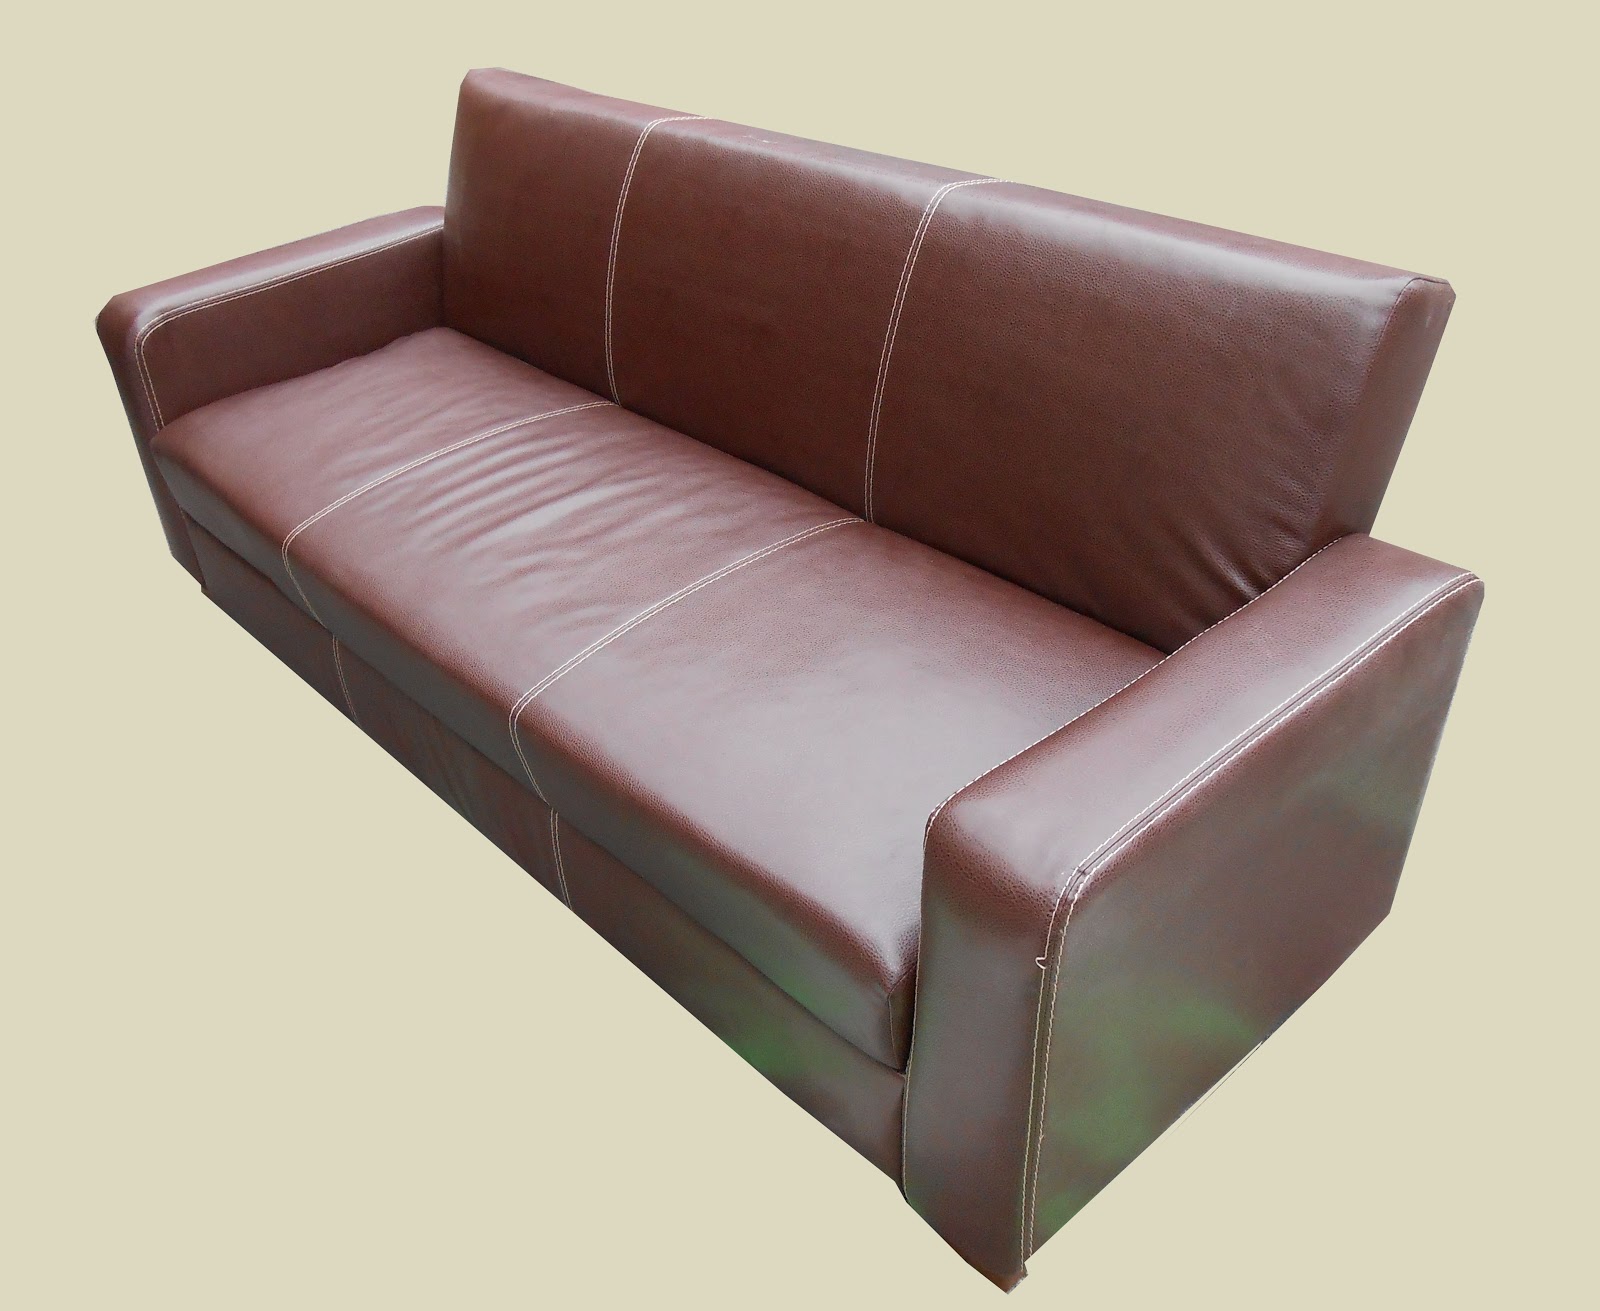 70 convertible leather sofa